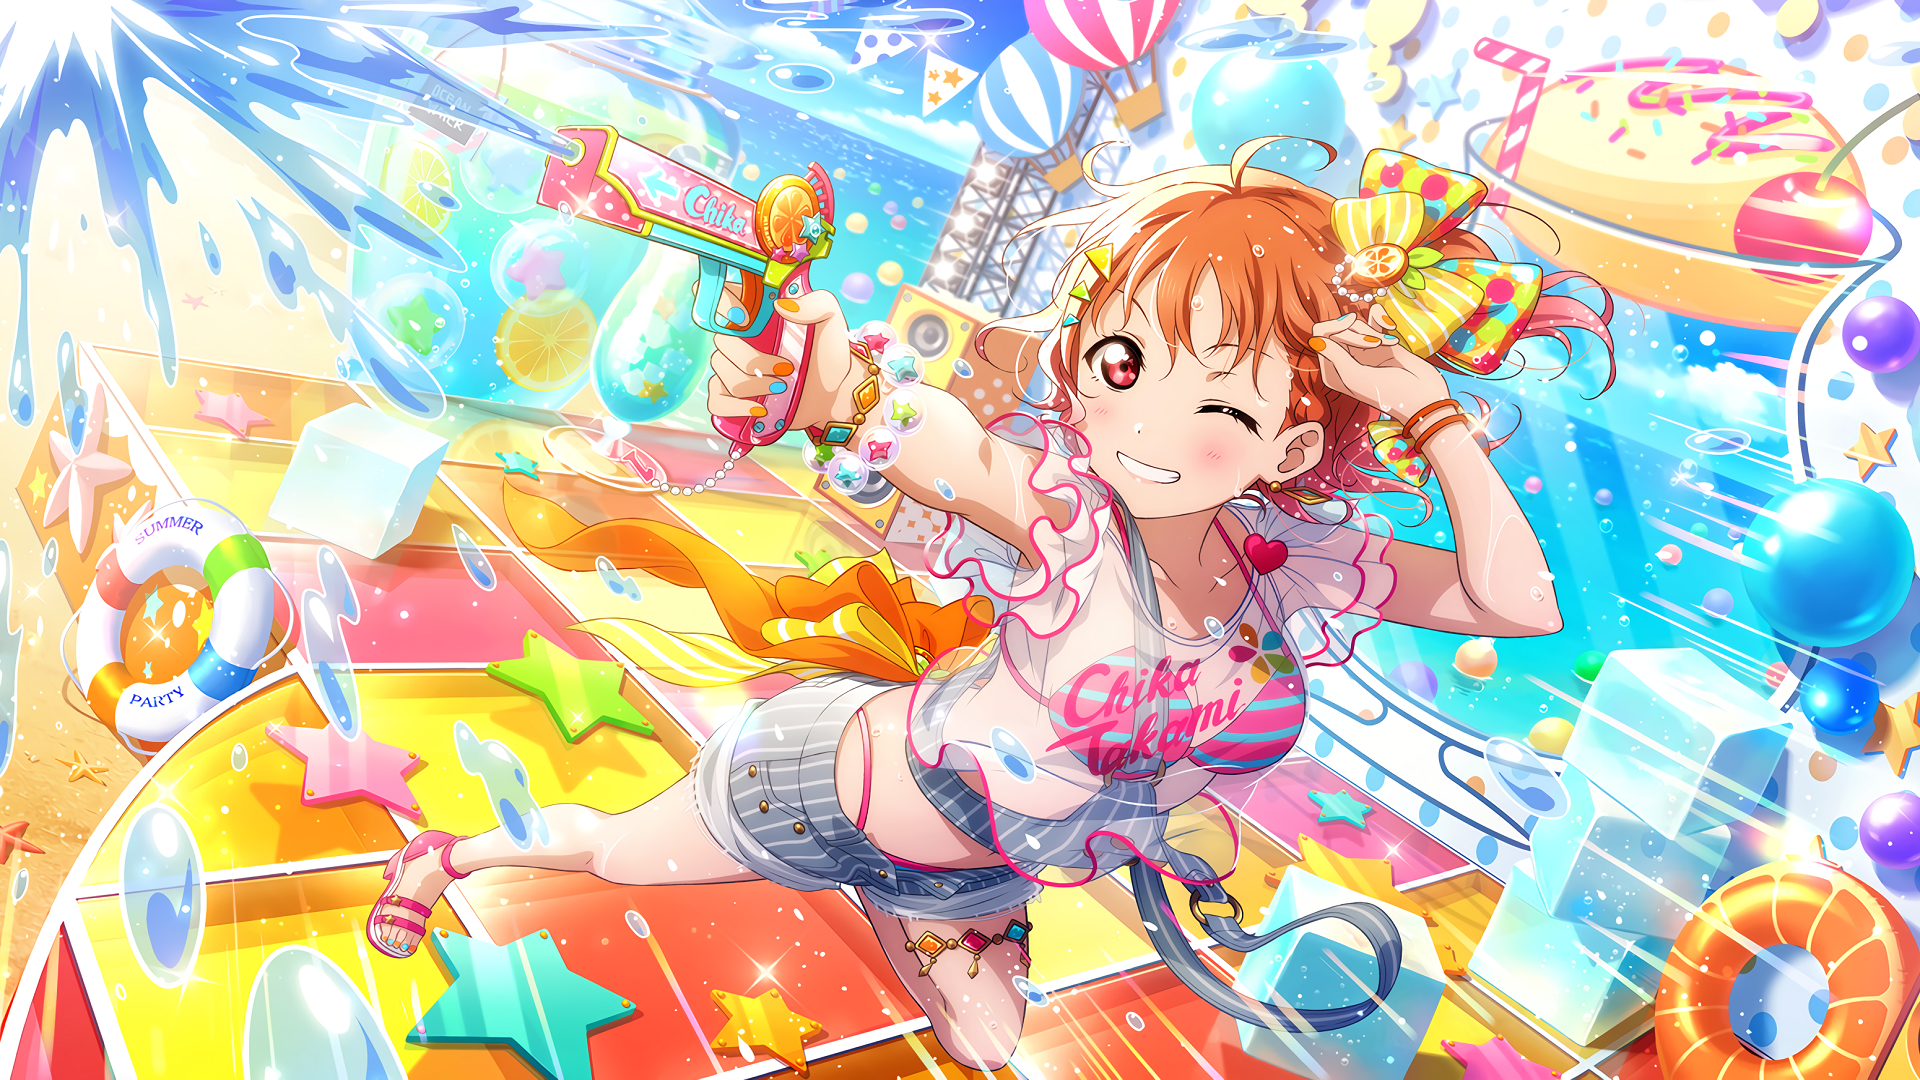 267UR-Takami-Chika-I-wanna-see-the-ocean-with-you-Chika-kyun-Summer-Avz53n.png